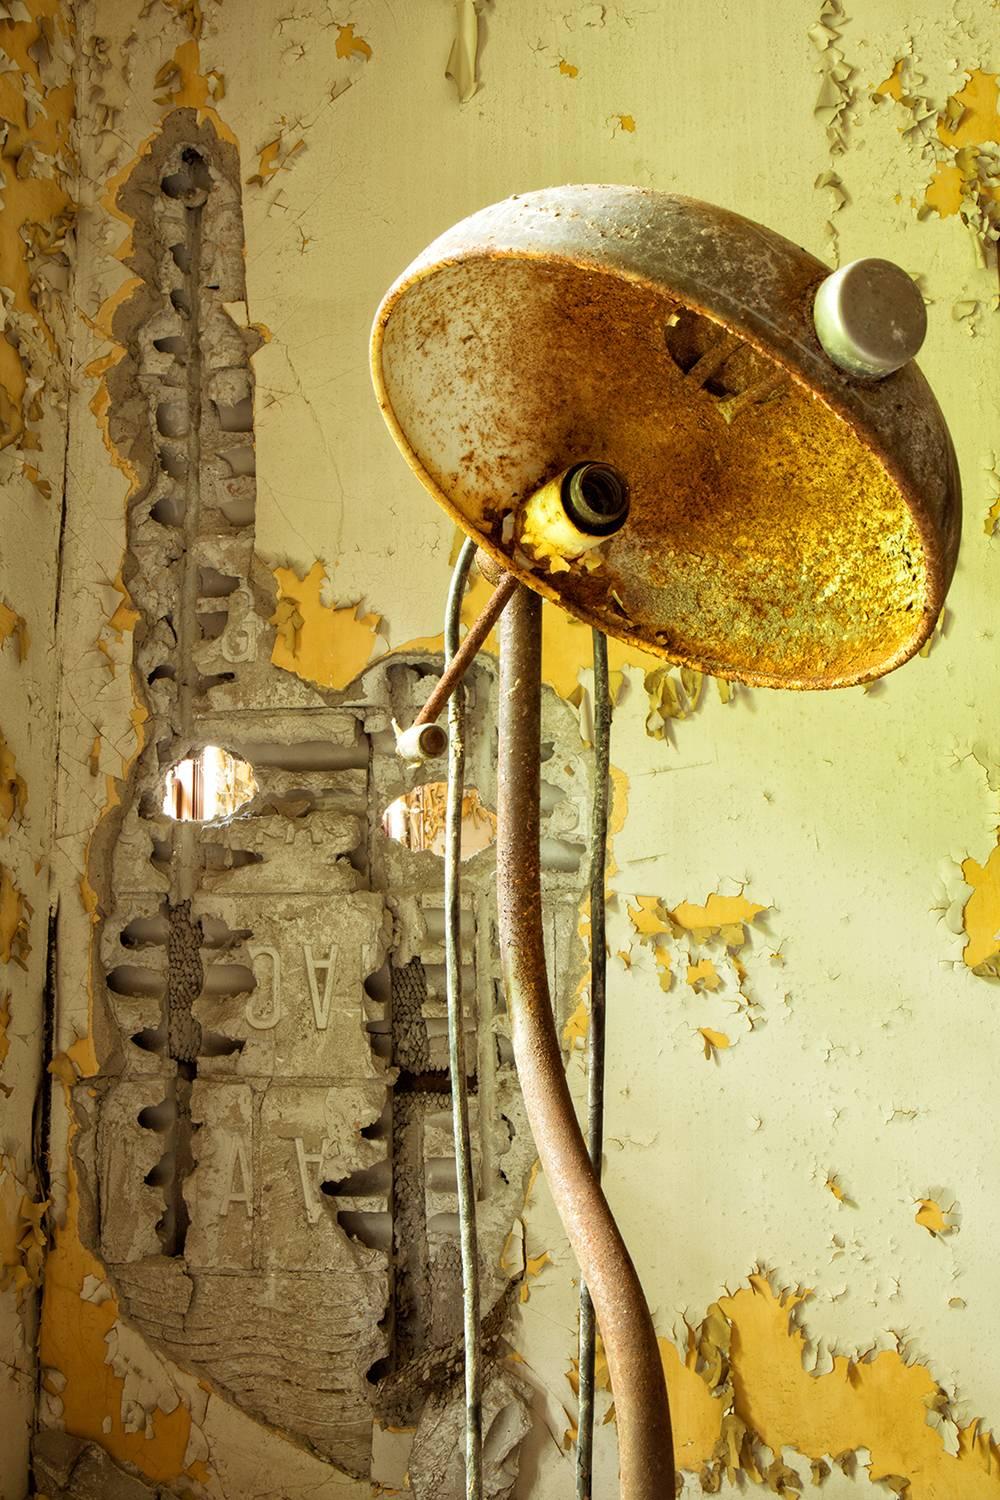 "Aged", contemporary, abandoned, yellow, lamp, vintage, color photo, metal print